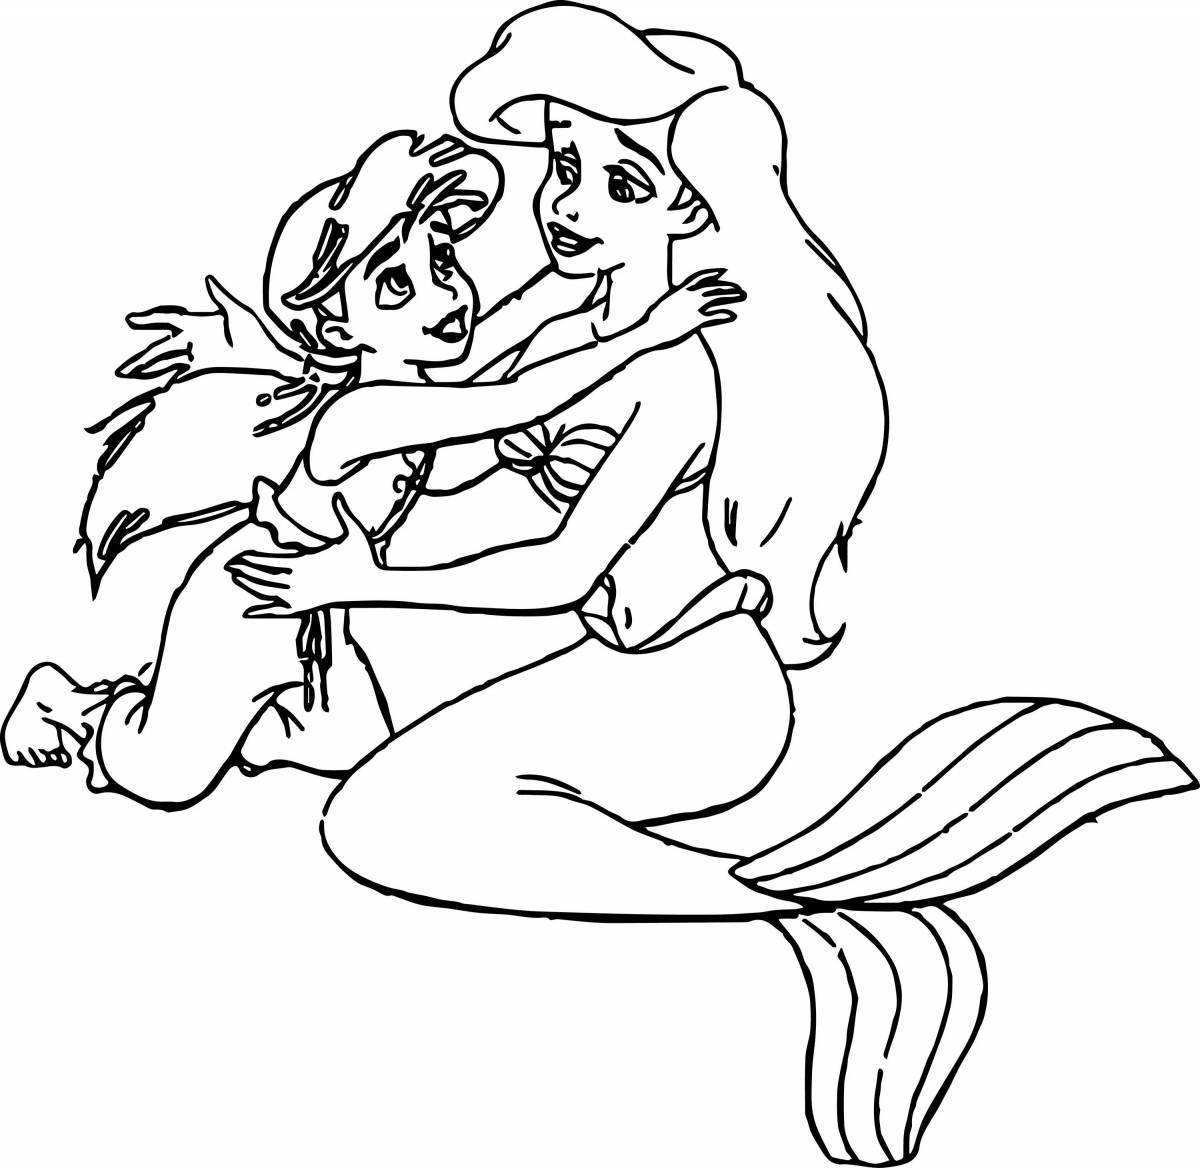 Coloring page ariel with legs